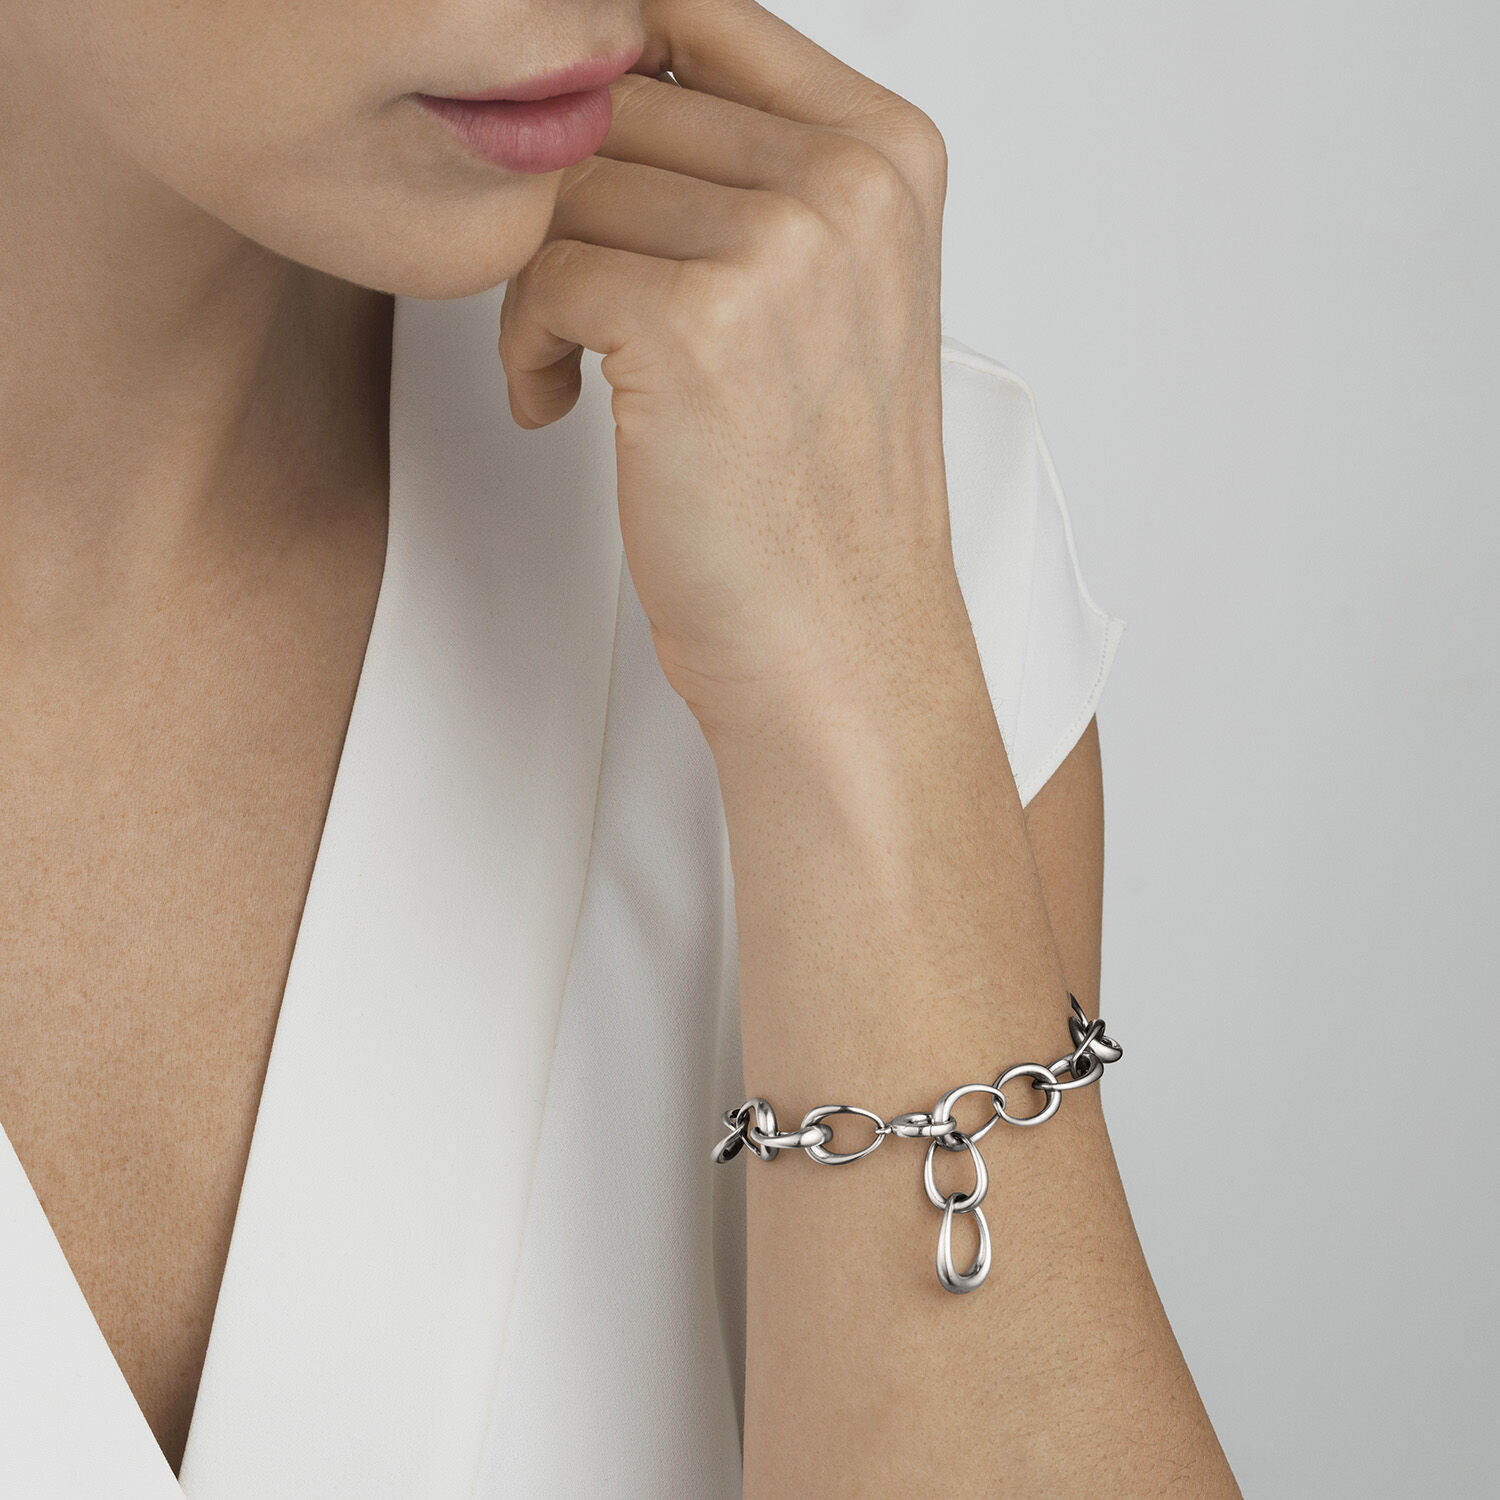 Offspring mother and childsilver bangle | Georg Jensen